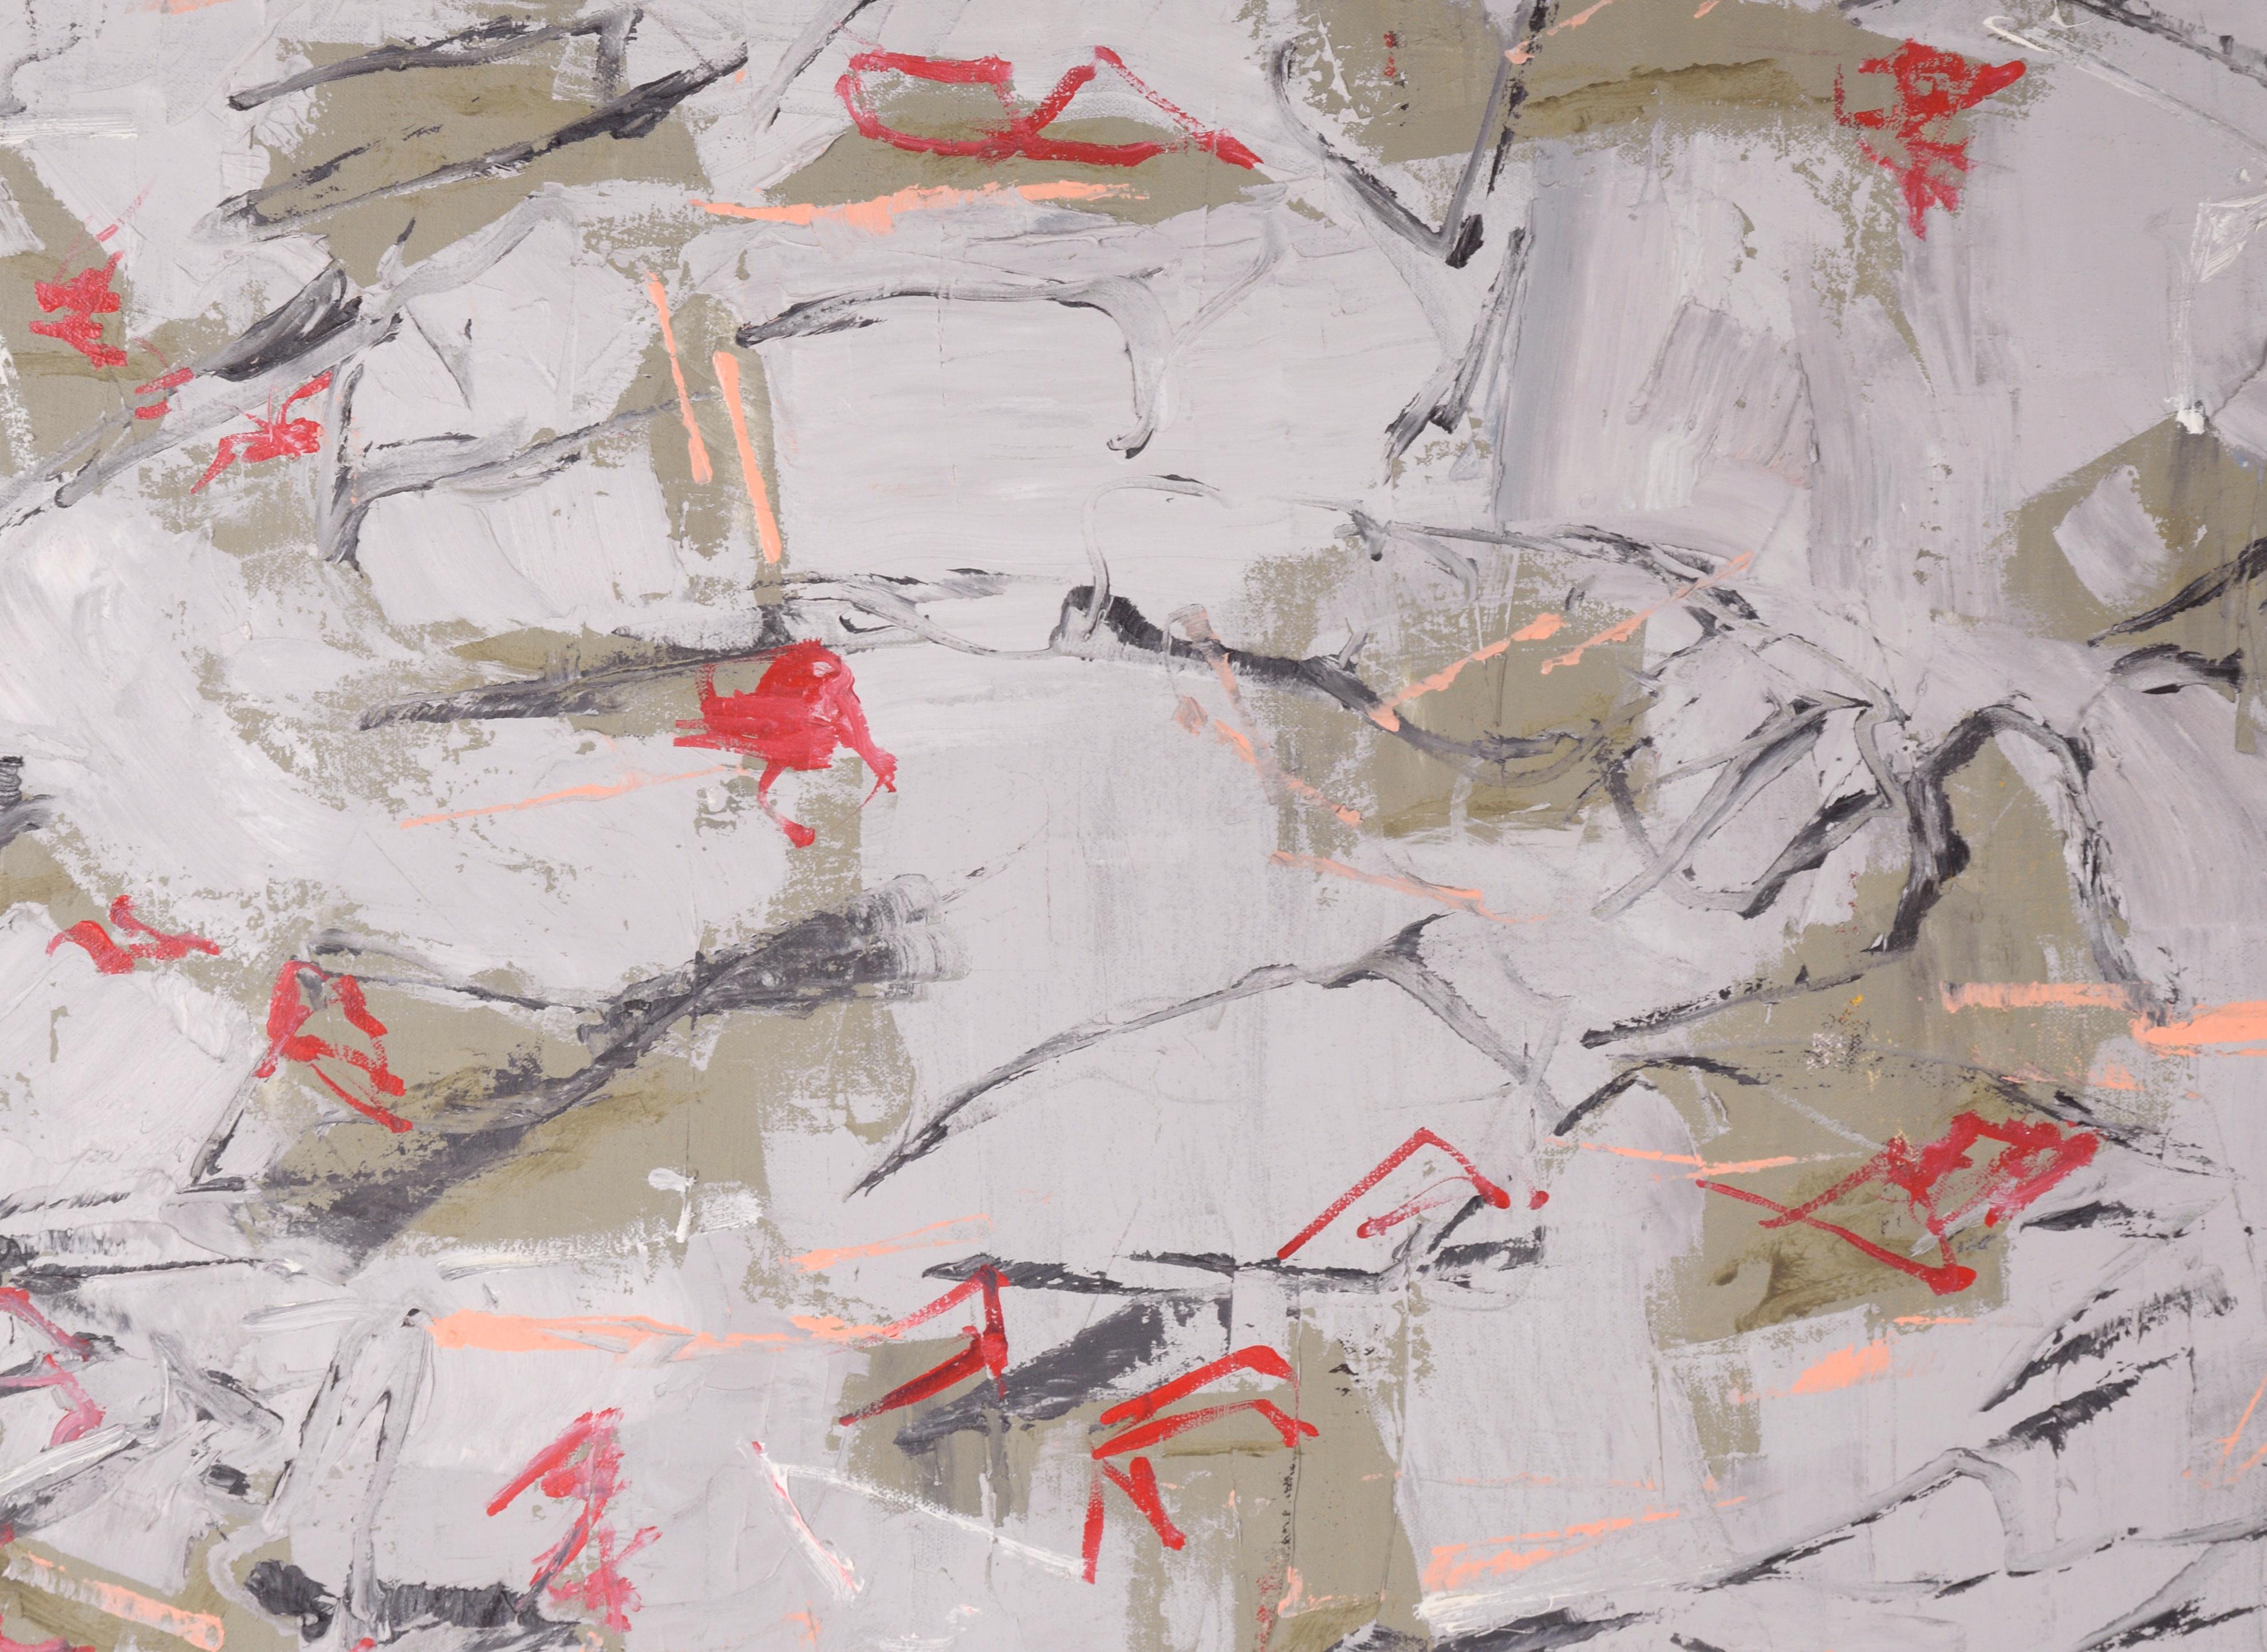 Gray and Green with Red Accents, Contemporary Large-Scale Abstract Expressionist - Painting by Michael Pauker 